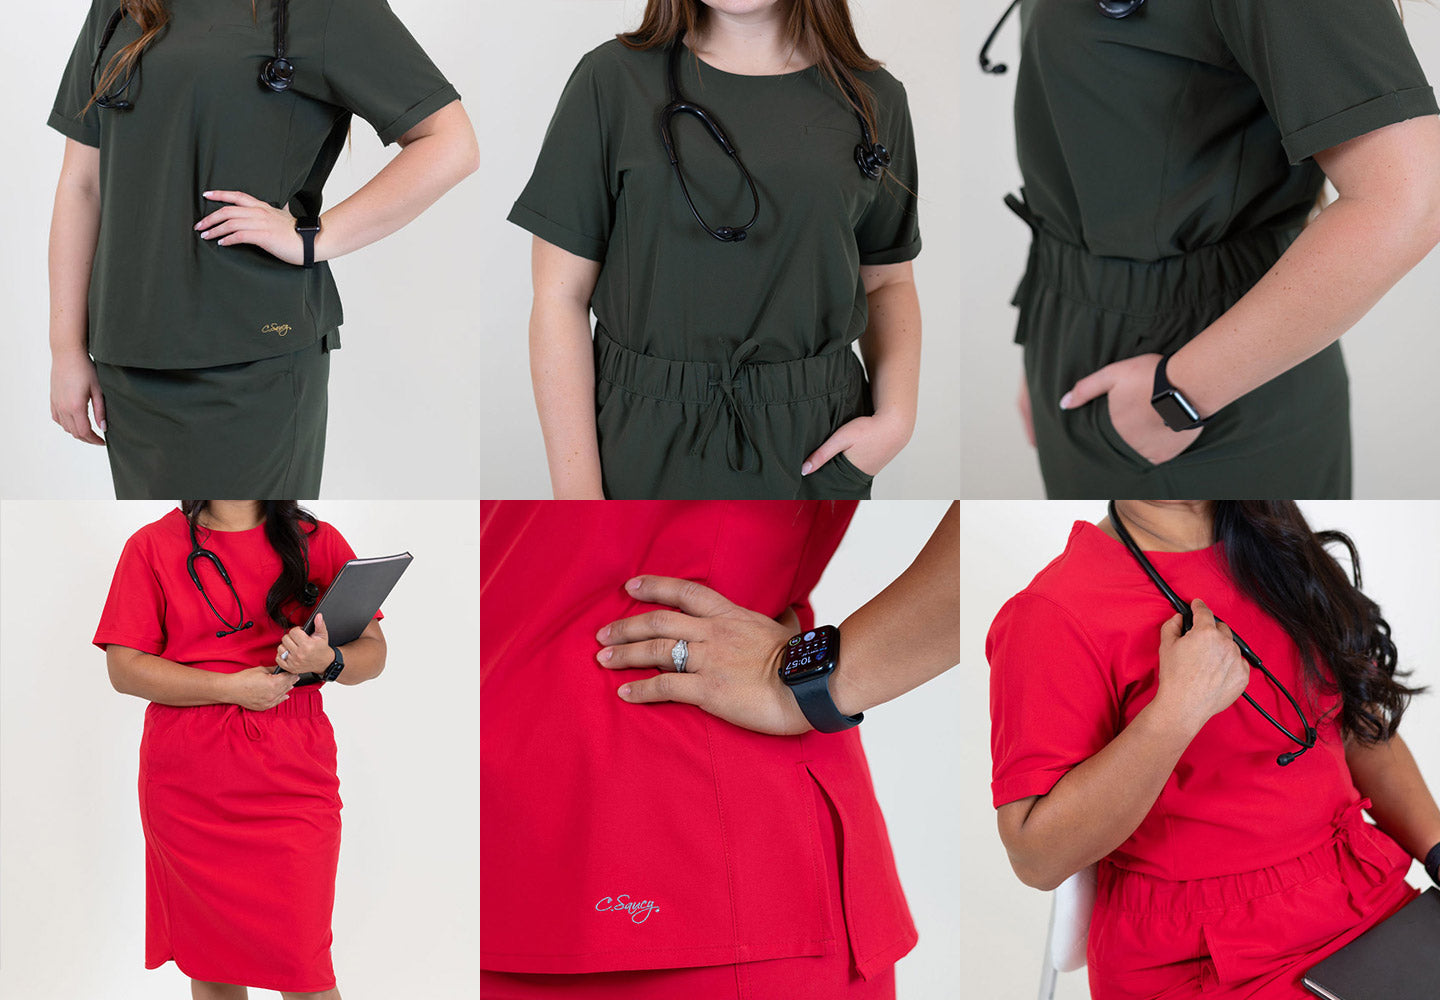 Women's New Arrivals  Medical scrubs outfit, Medical scrubs fashion, Nurse  outfit scrubs